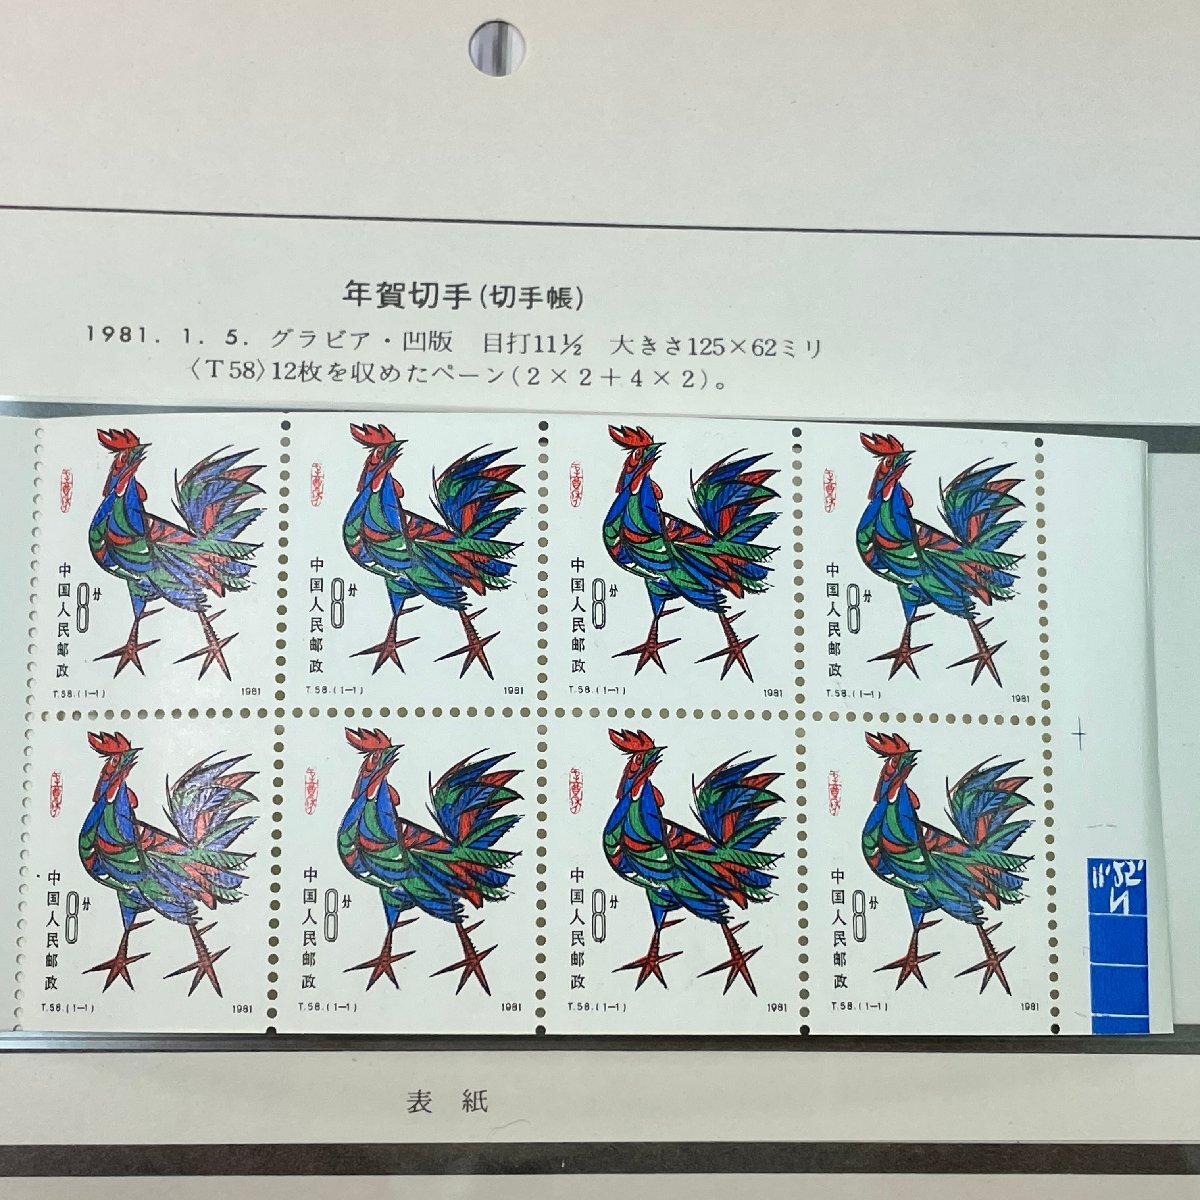 m002 C3(10) 41 China stamp postage 385 jpy storage goods 1981 year T58 New Year's greetings stamp . stamp .pe-n cover with cover Boss to-k leaf attaching 